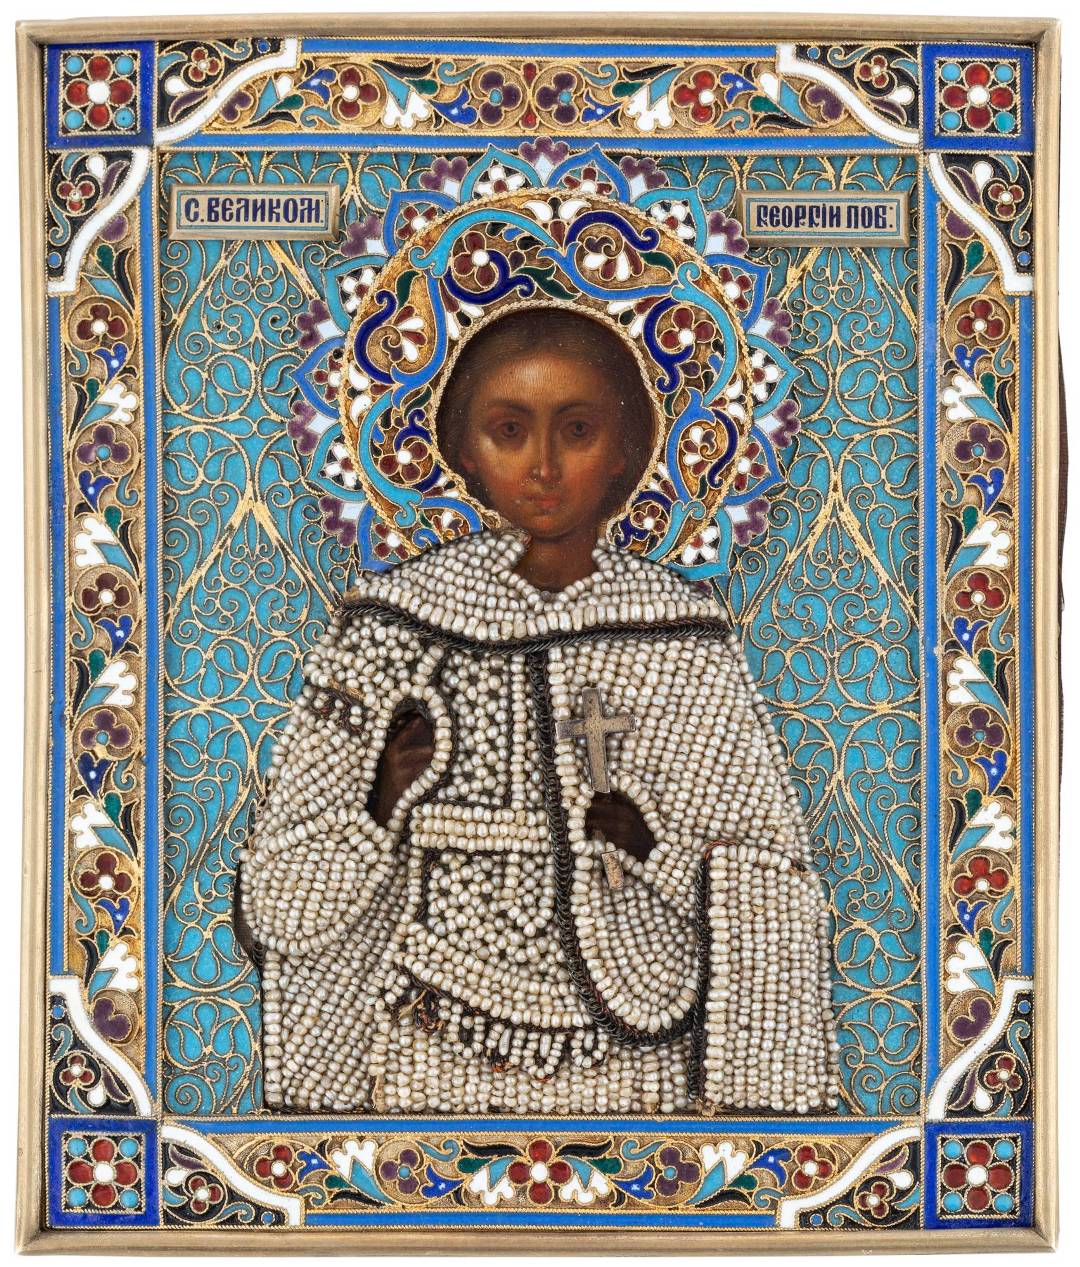 Traveling icon of St. George